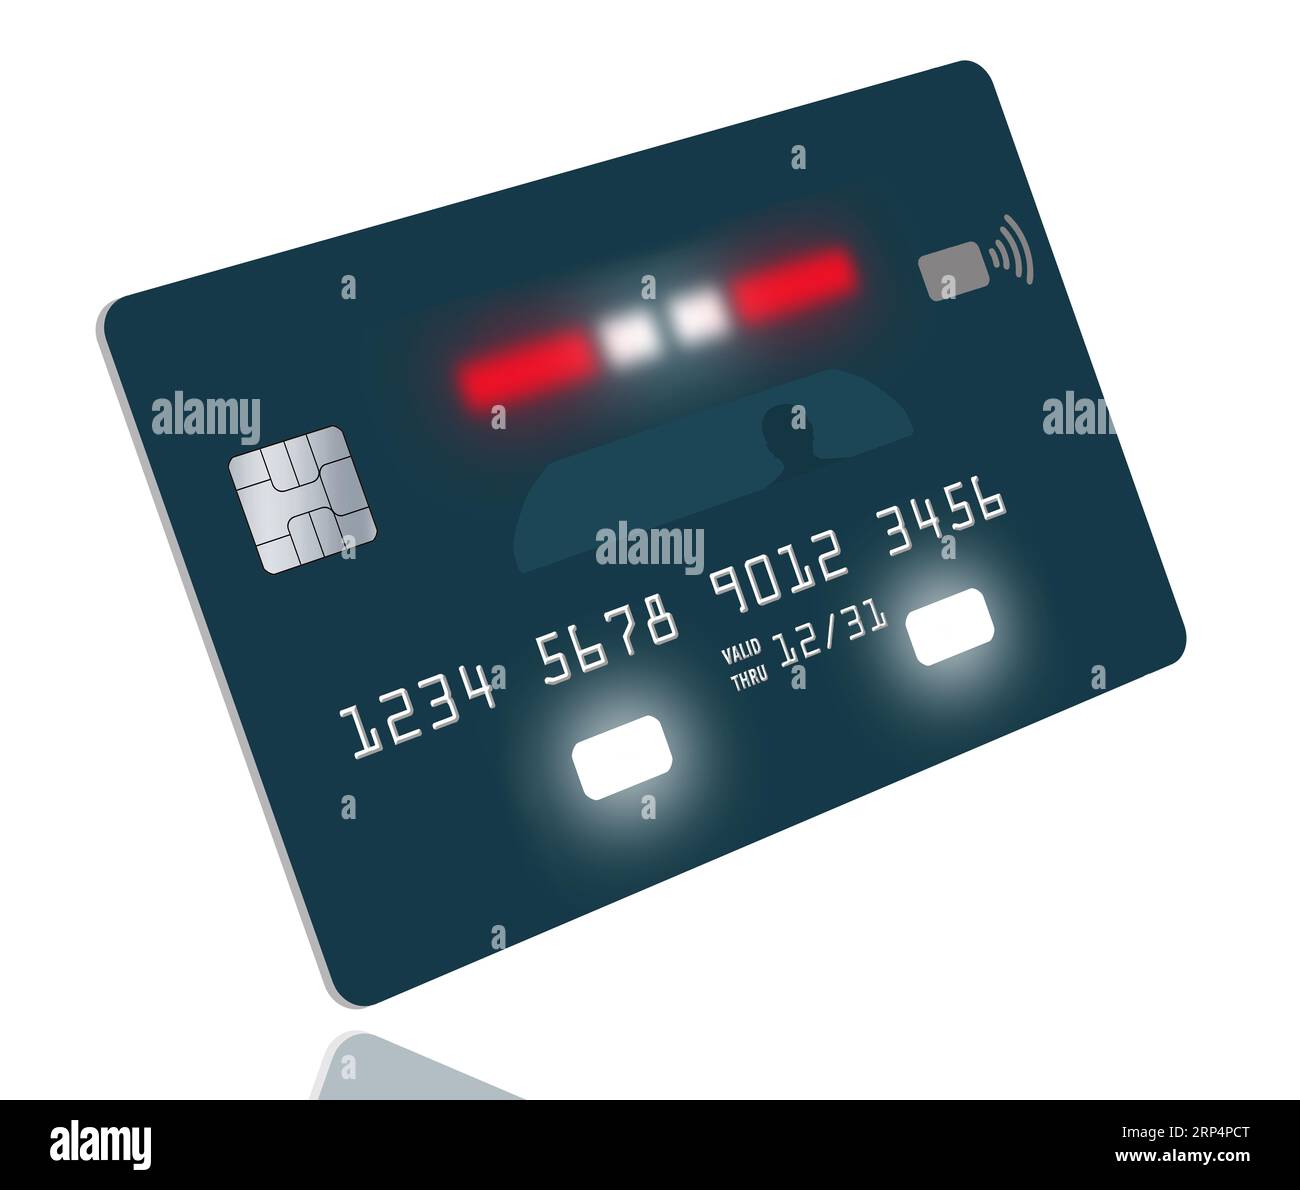 A police car with red lights on decorates a generic credit card in a 3-d illustration about credit card fraud and credit card theft. Stock Photo